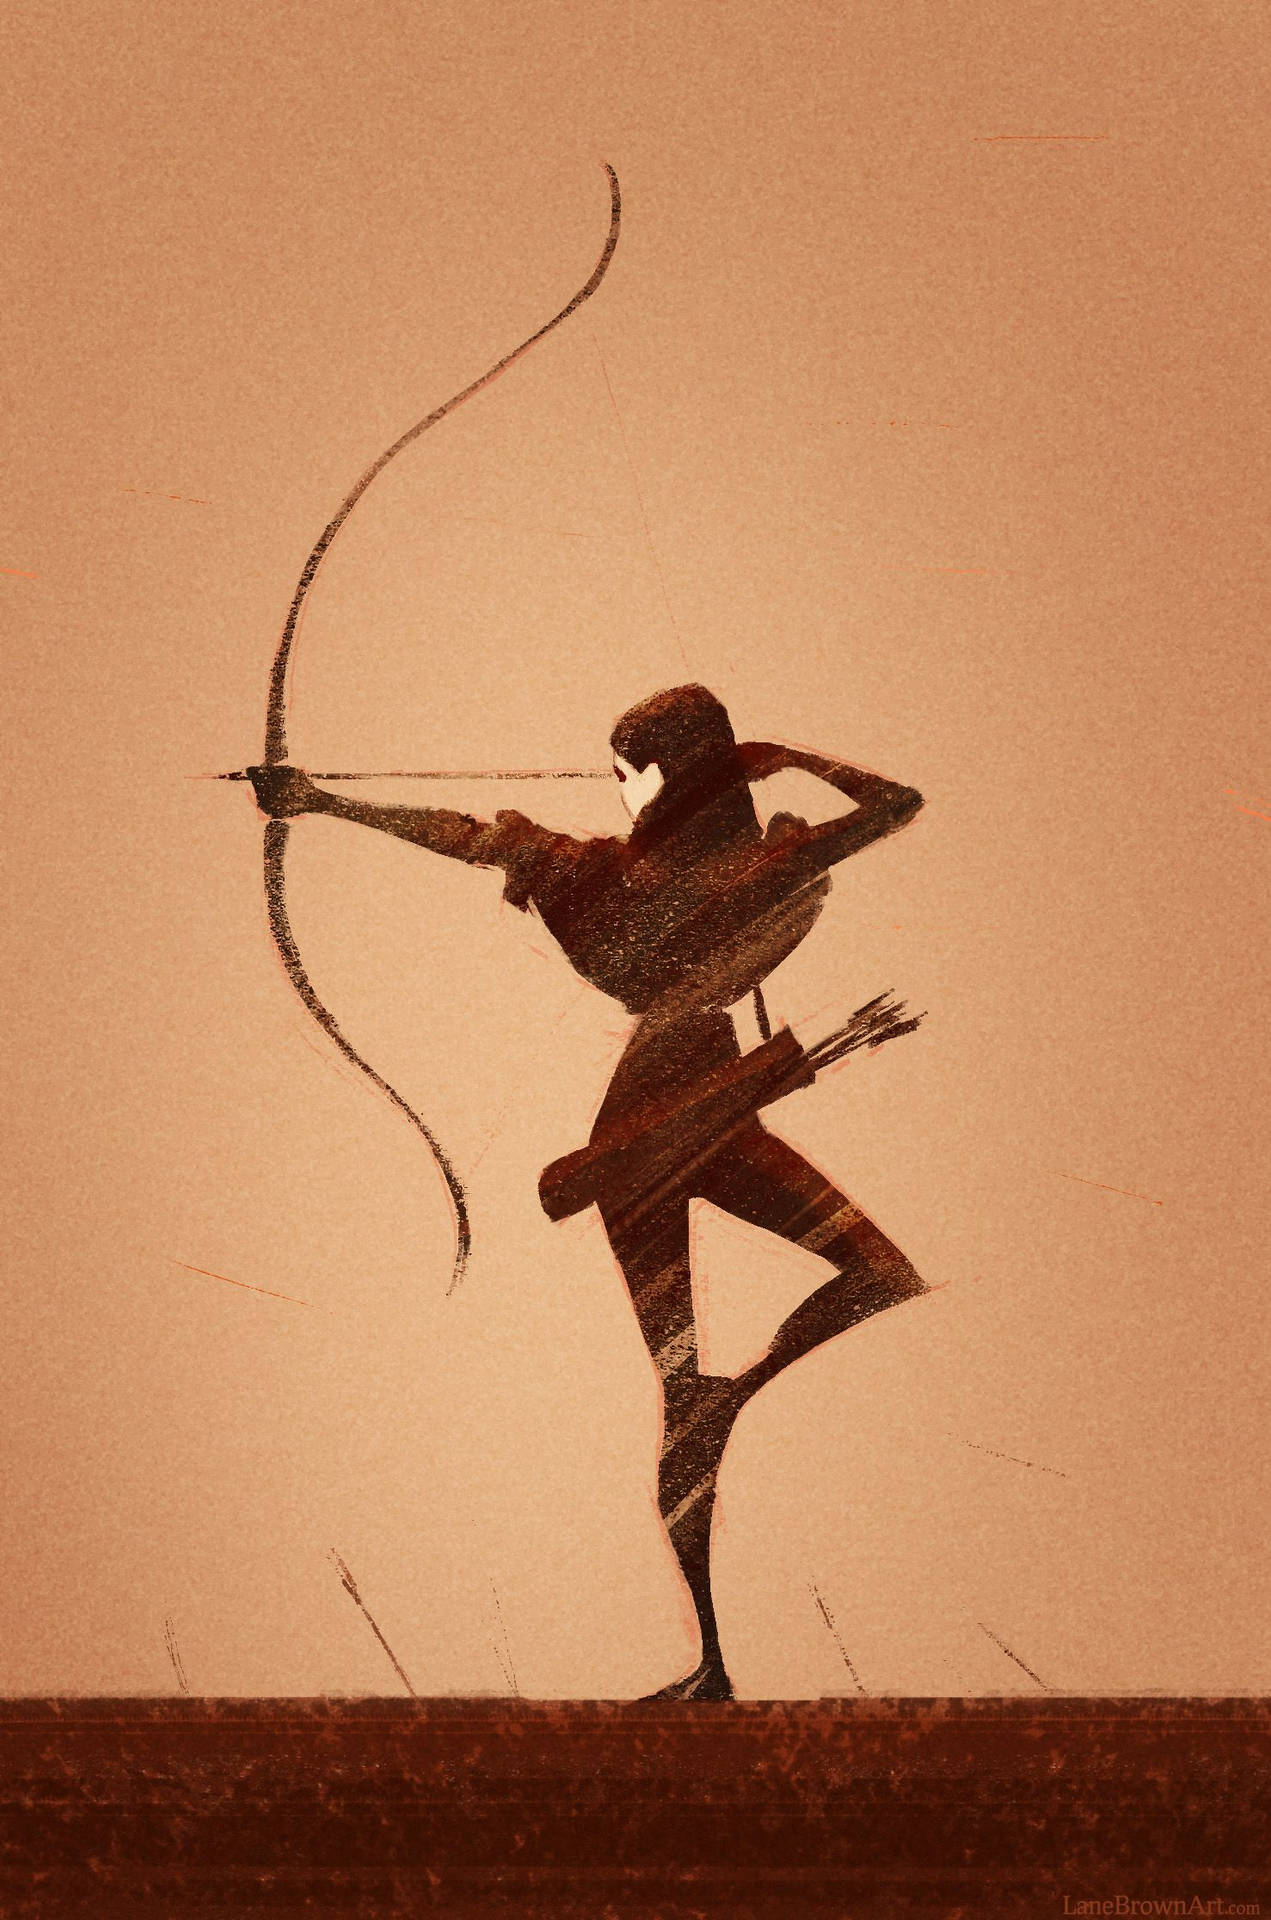 Woman Practicing Archery in Artistic Setting Wallpaper